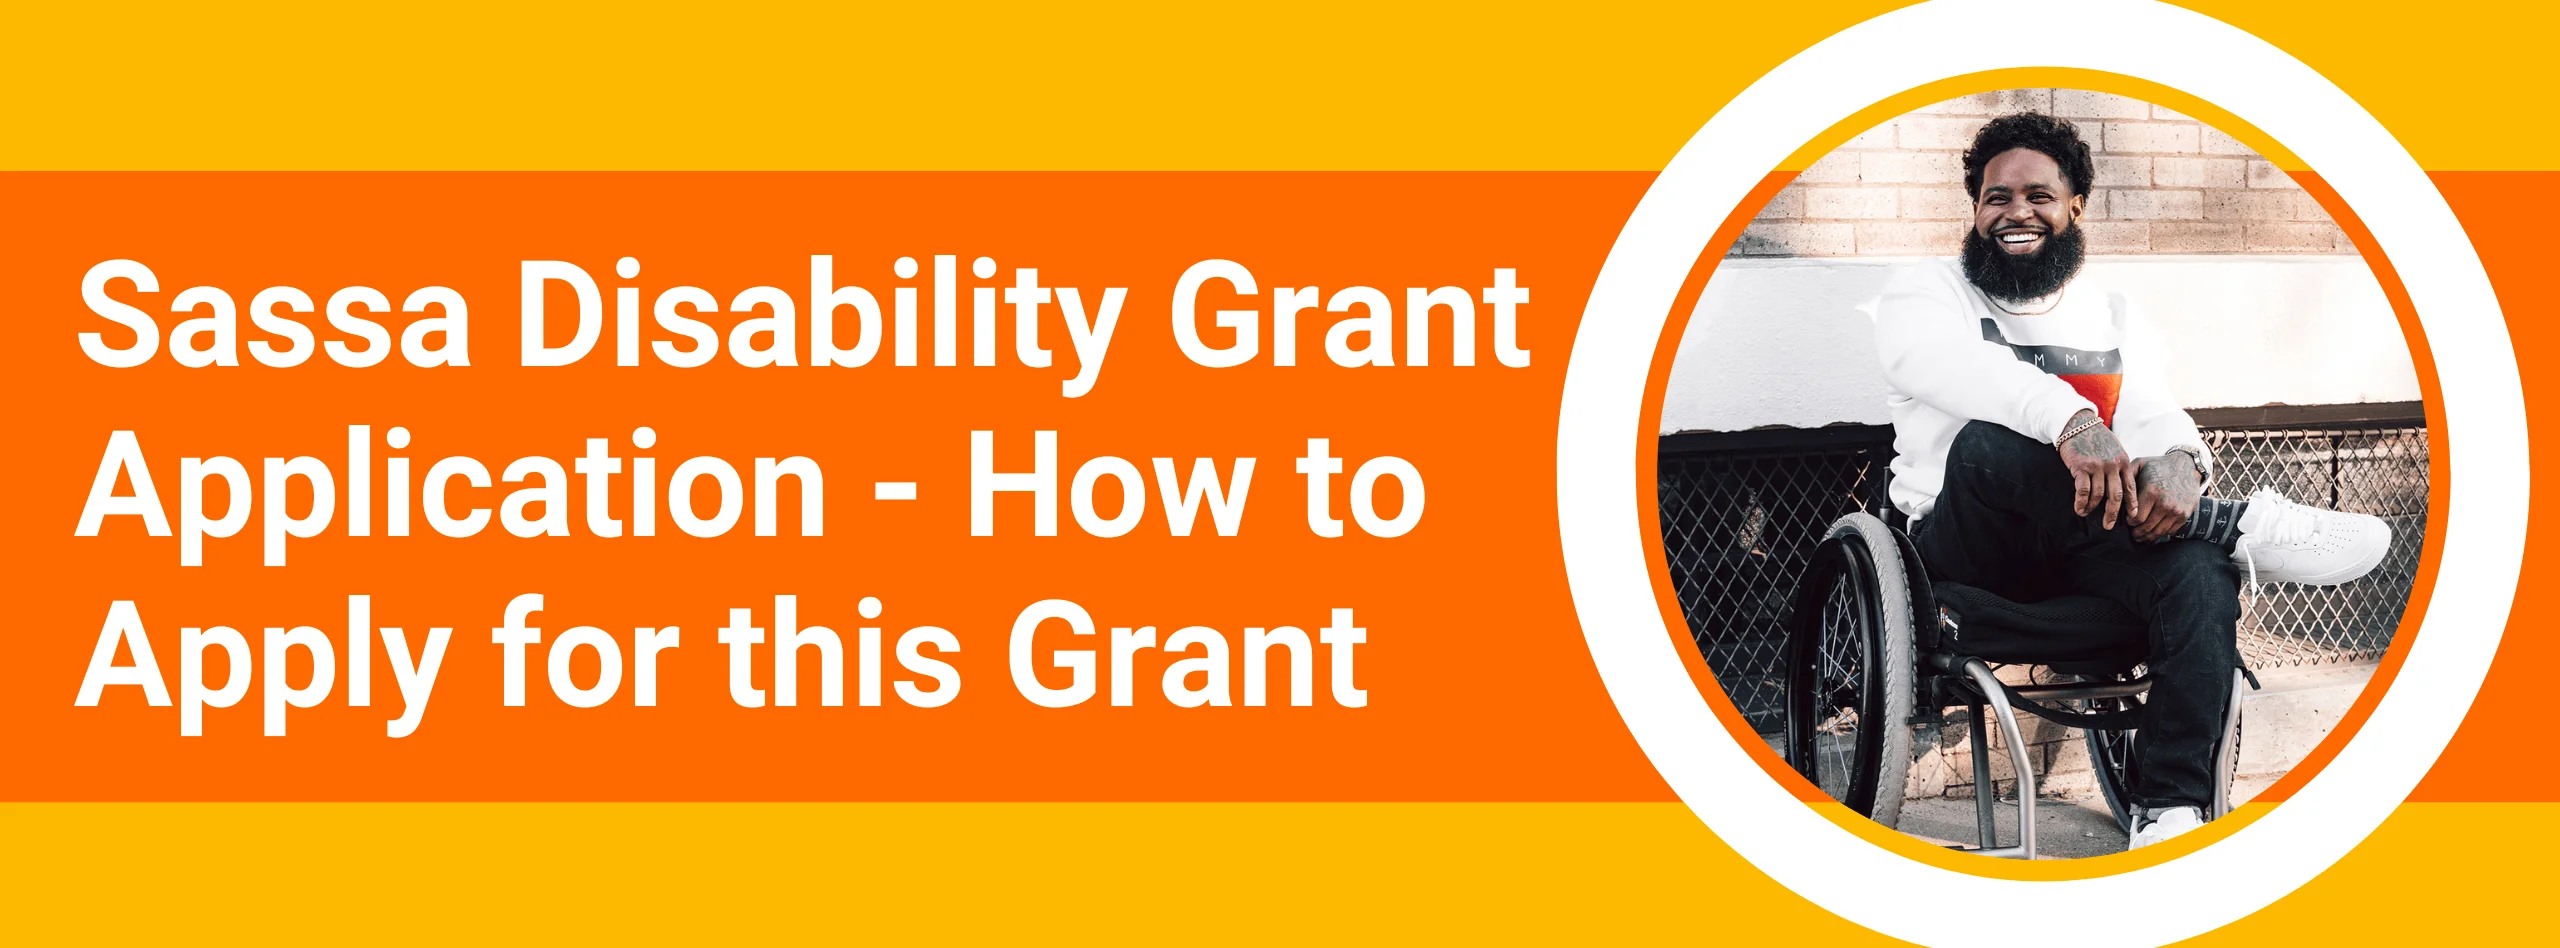 Sassa Disability Grant Application - How to Apply for this Grant